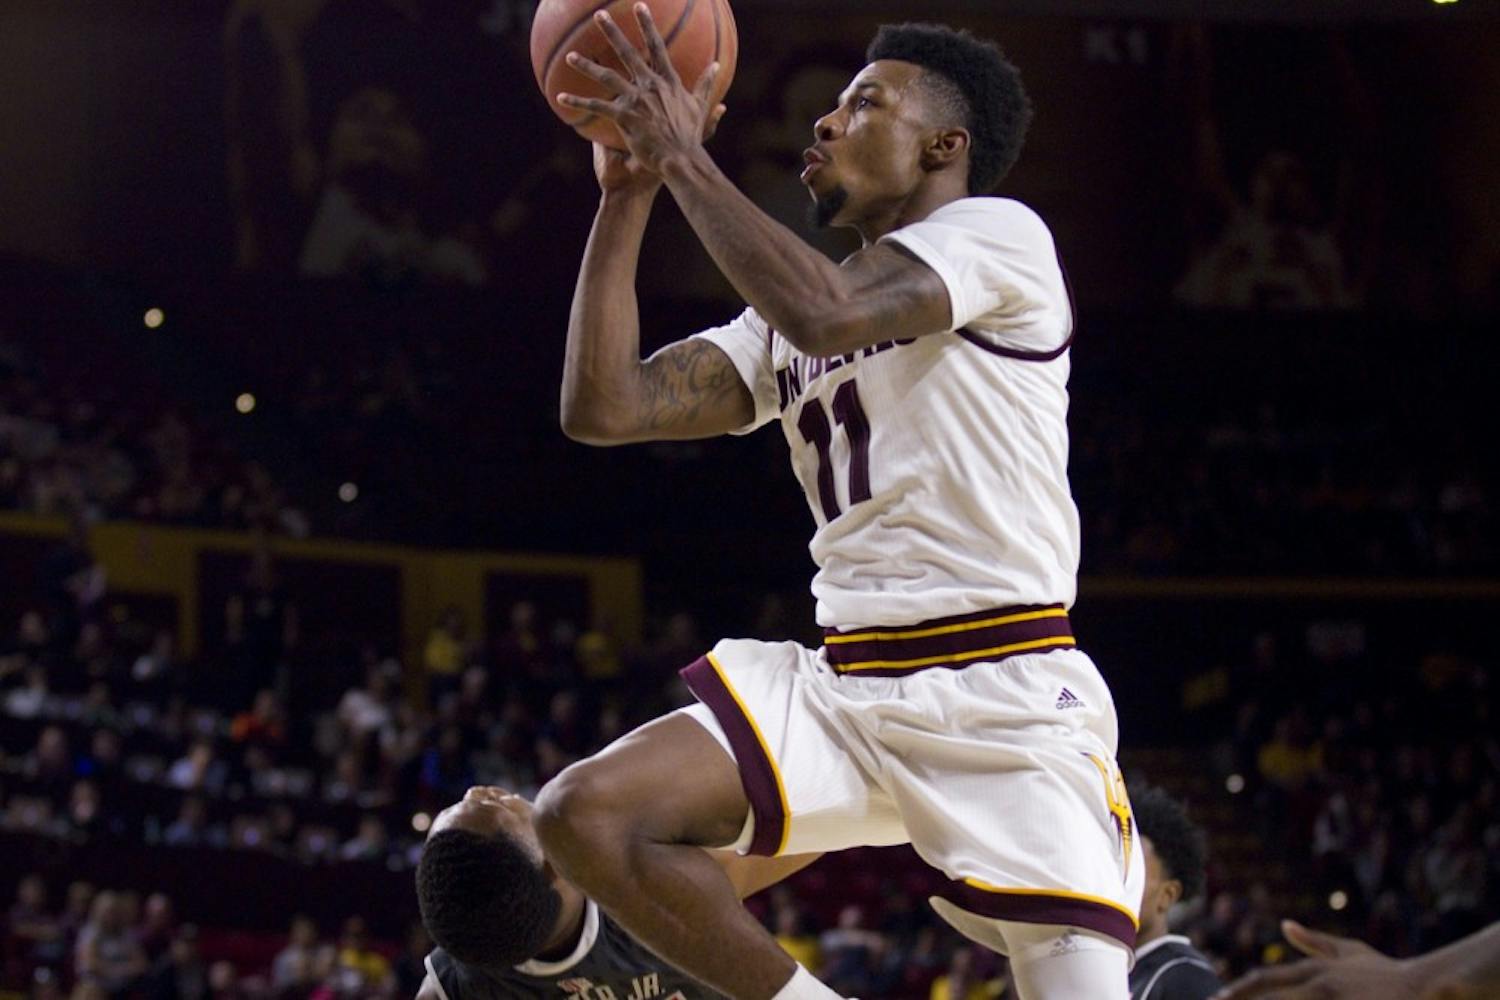 ASU junior guard Shannon Evans II (11) goes up for a layup in the second half of a men's basketball game against the UNLV Runnin' Rebels in Wells Fargo Arena in Tempe, Arizona on Saturday, Dec. 3, 2016. ASU won 97-73, putting them at 5-3 on the season.